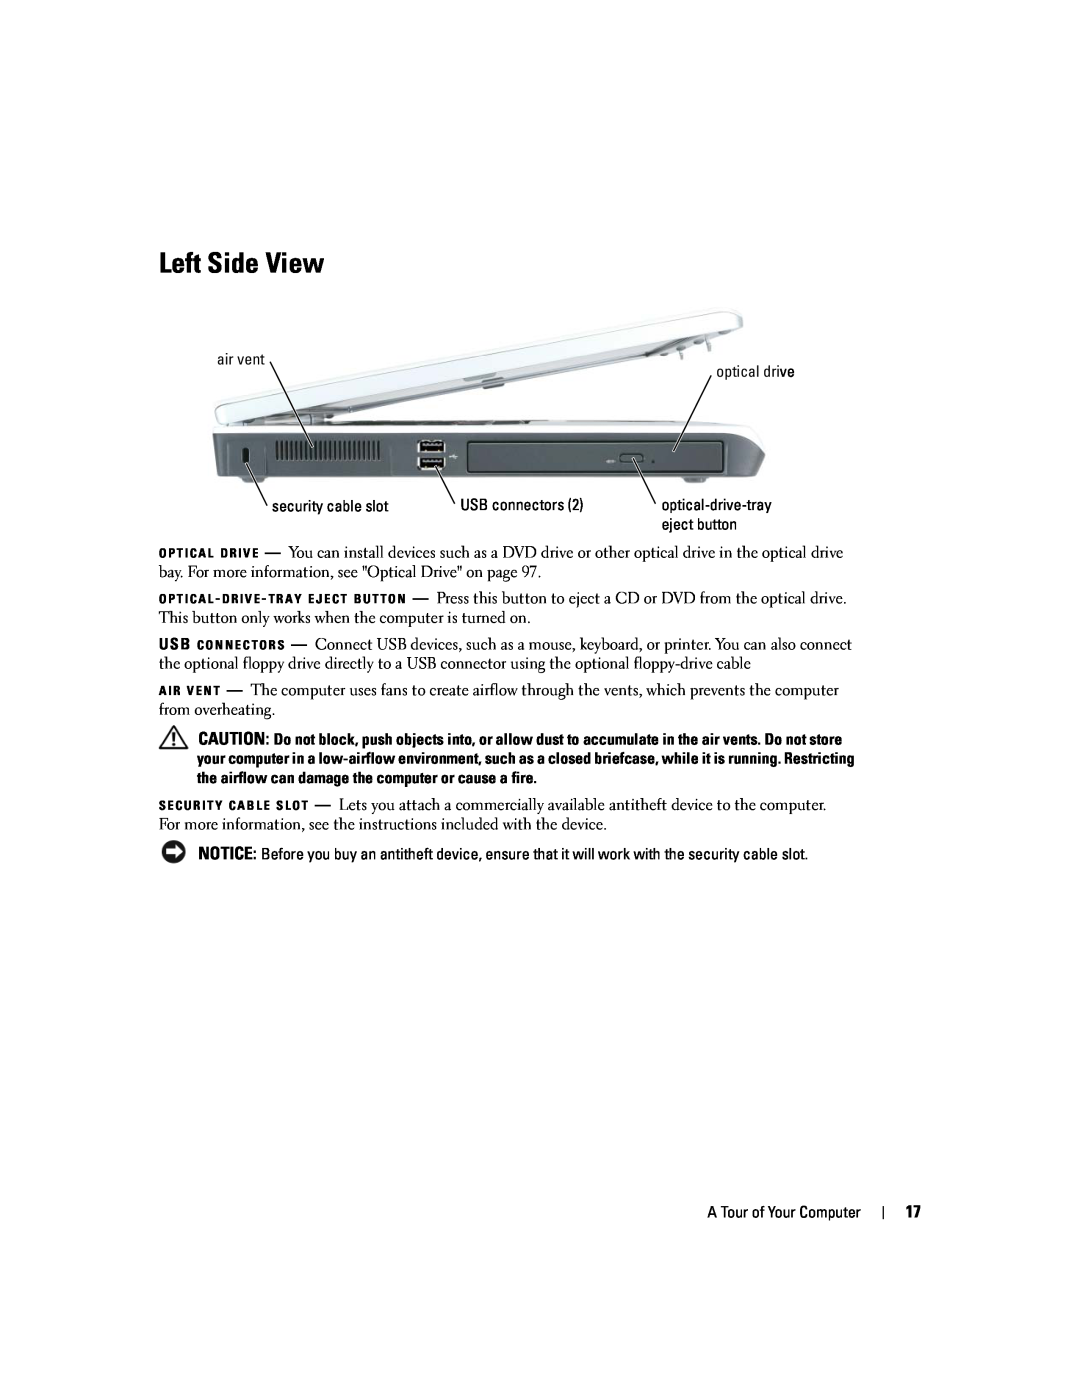 Dell 9300 owner manual Left Side View, optical-drive-tray 